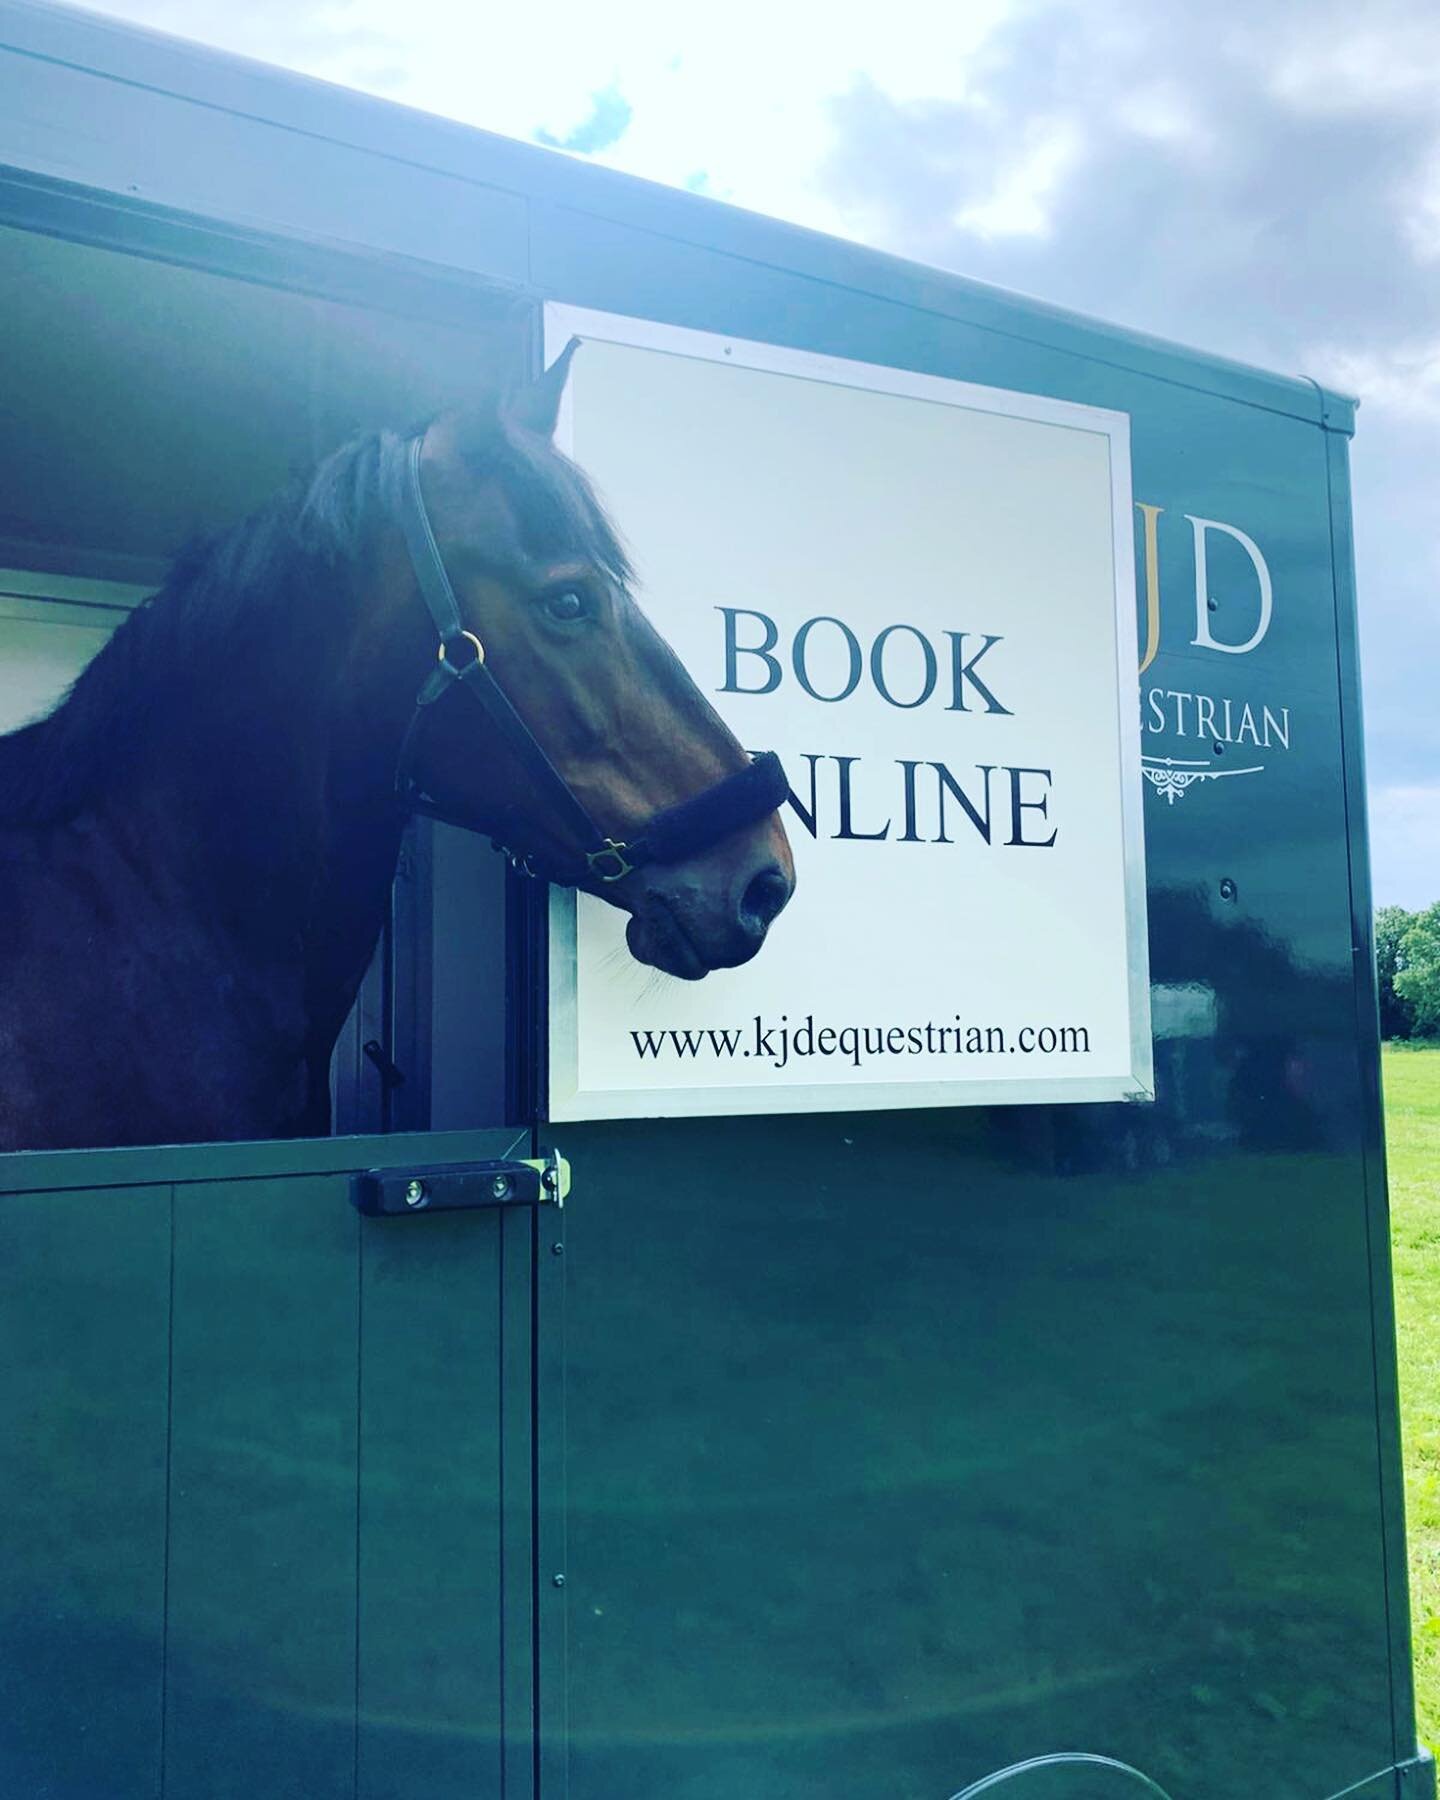 One of our regular hirers&rsquo; horse doing a fab job of advertising the Horsebox here
&bull;
We LOVE to see your photos, so keep sending them in and tagging us @kjd_equestrian_transport 📸